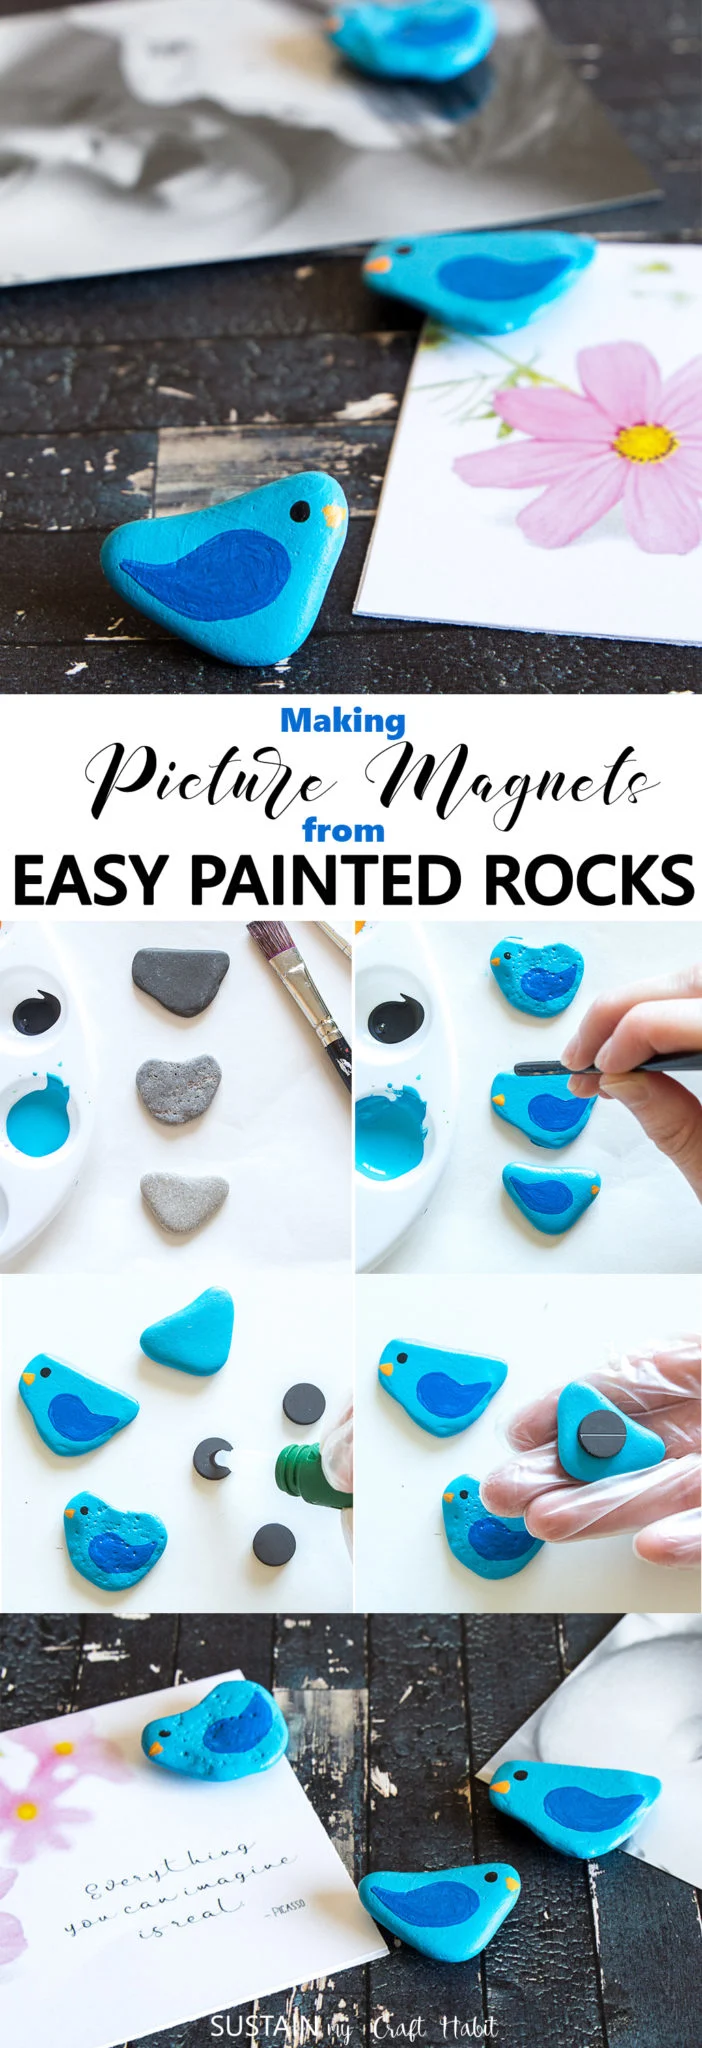 Adorable and easy painted rocks! These little painted rock birds were turned into useful fridge magnets. Pretty spring decor idea! #rockpainting #birds #paintedrocks #springcrafts